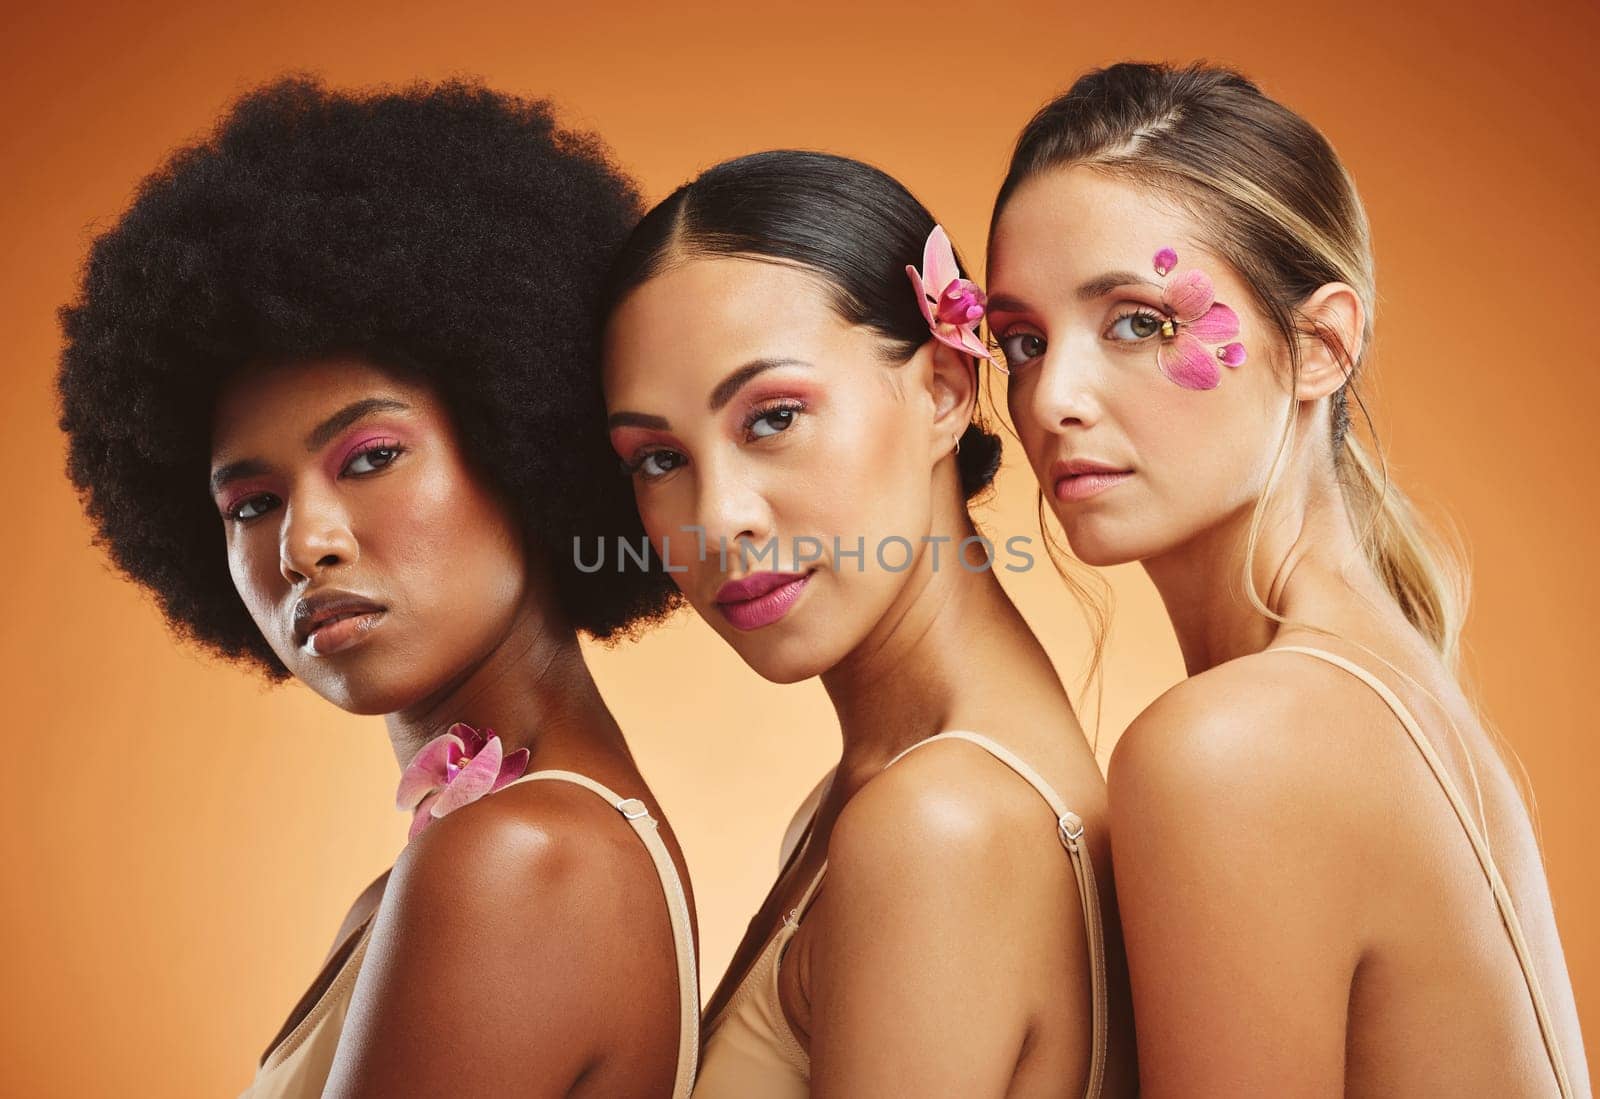 Skincare, flowers and beauty portrait of women in studio for feminism, woman empowerment and cosmetics. Diversity, face and group of beautiful natural models with floral standing by orange background.